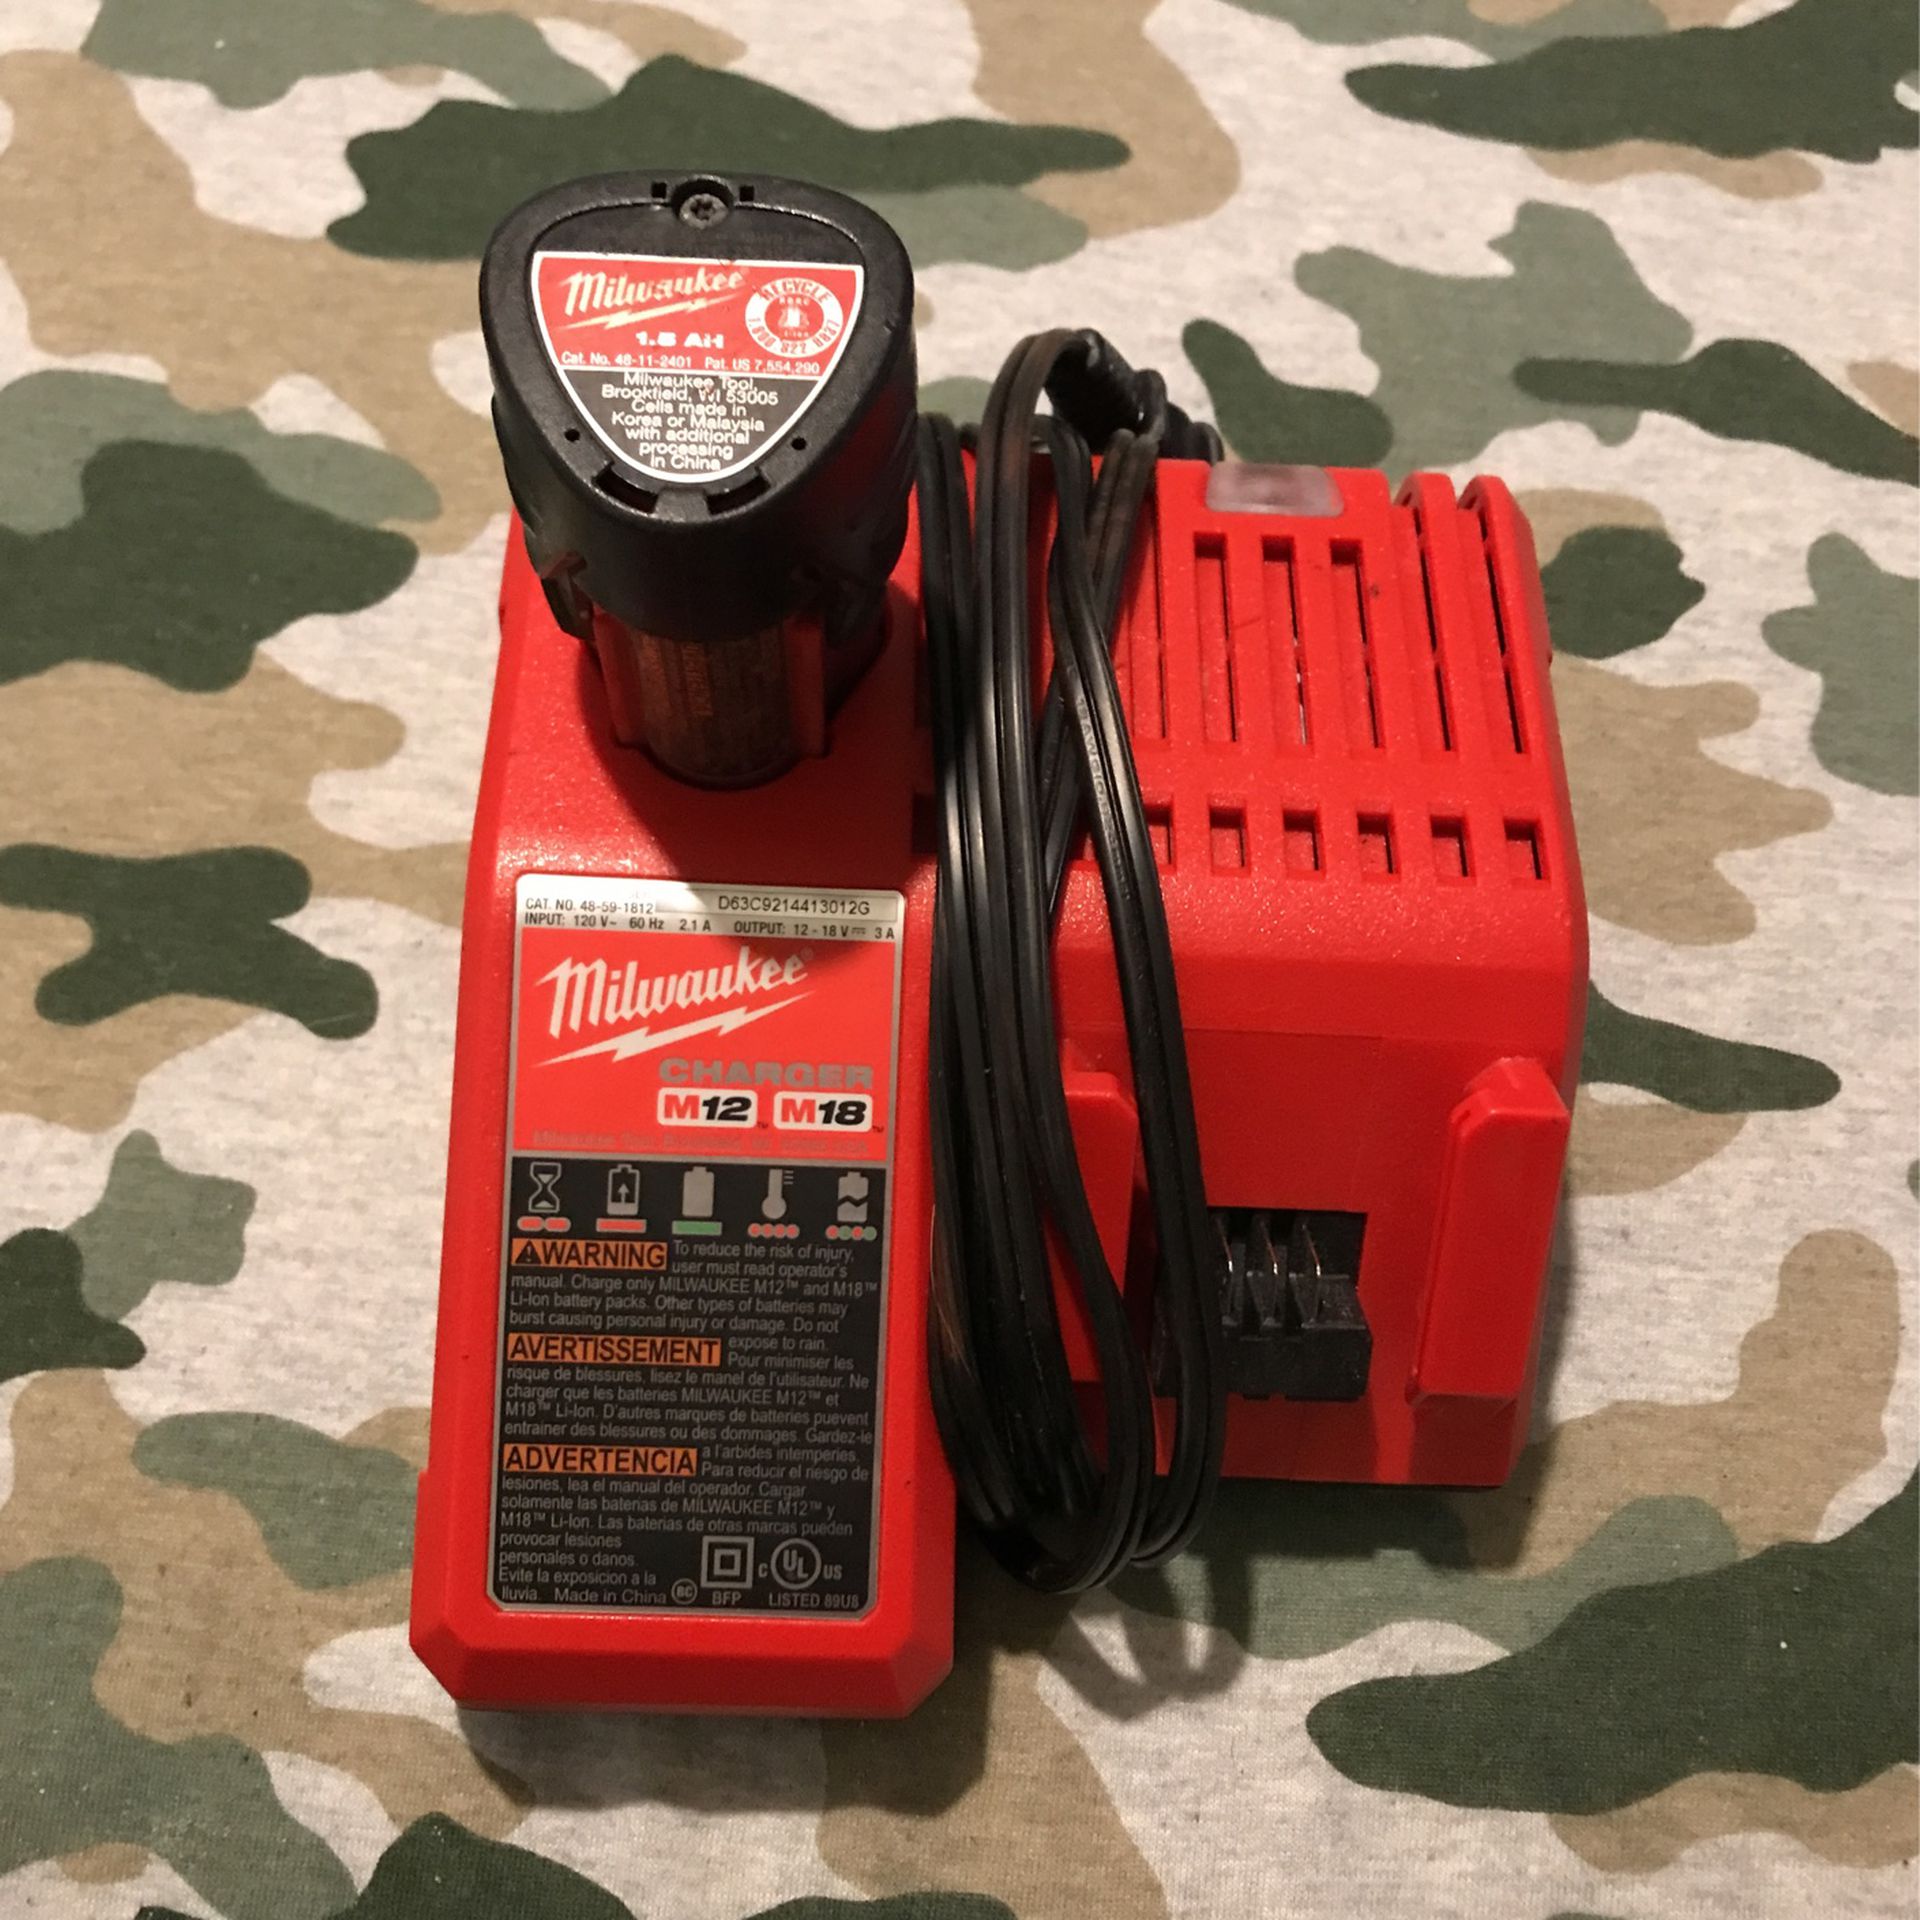 Milwaukee M12, M18 Charger